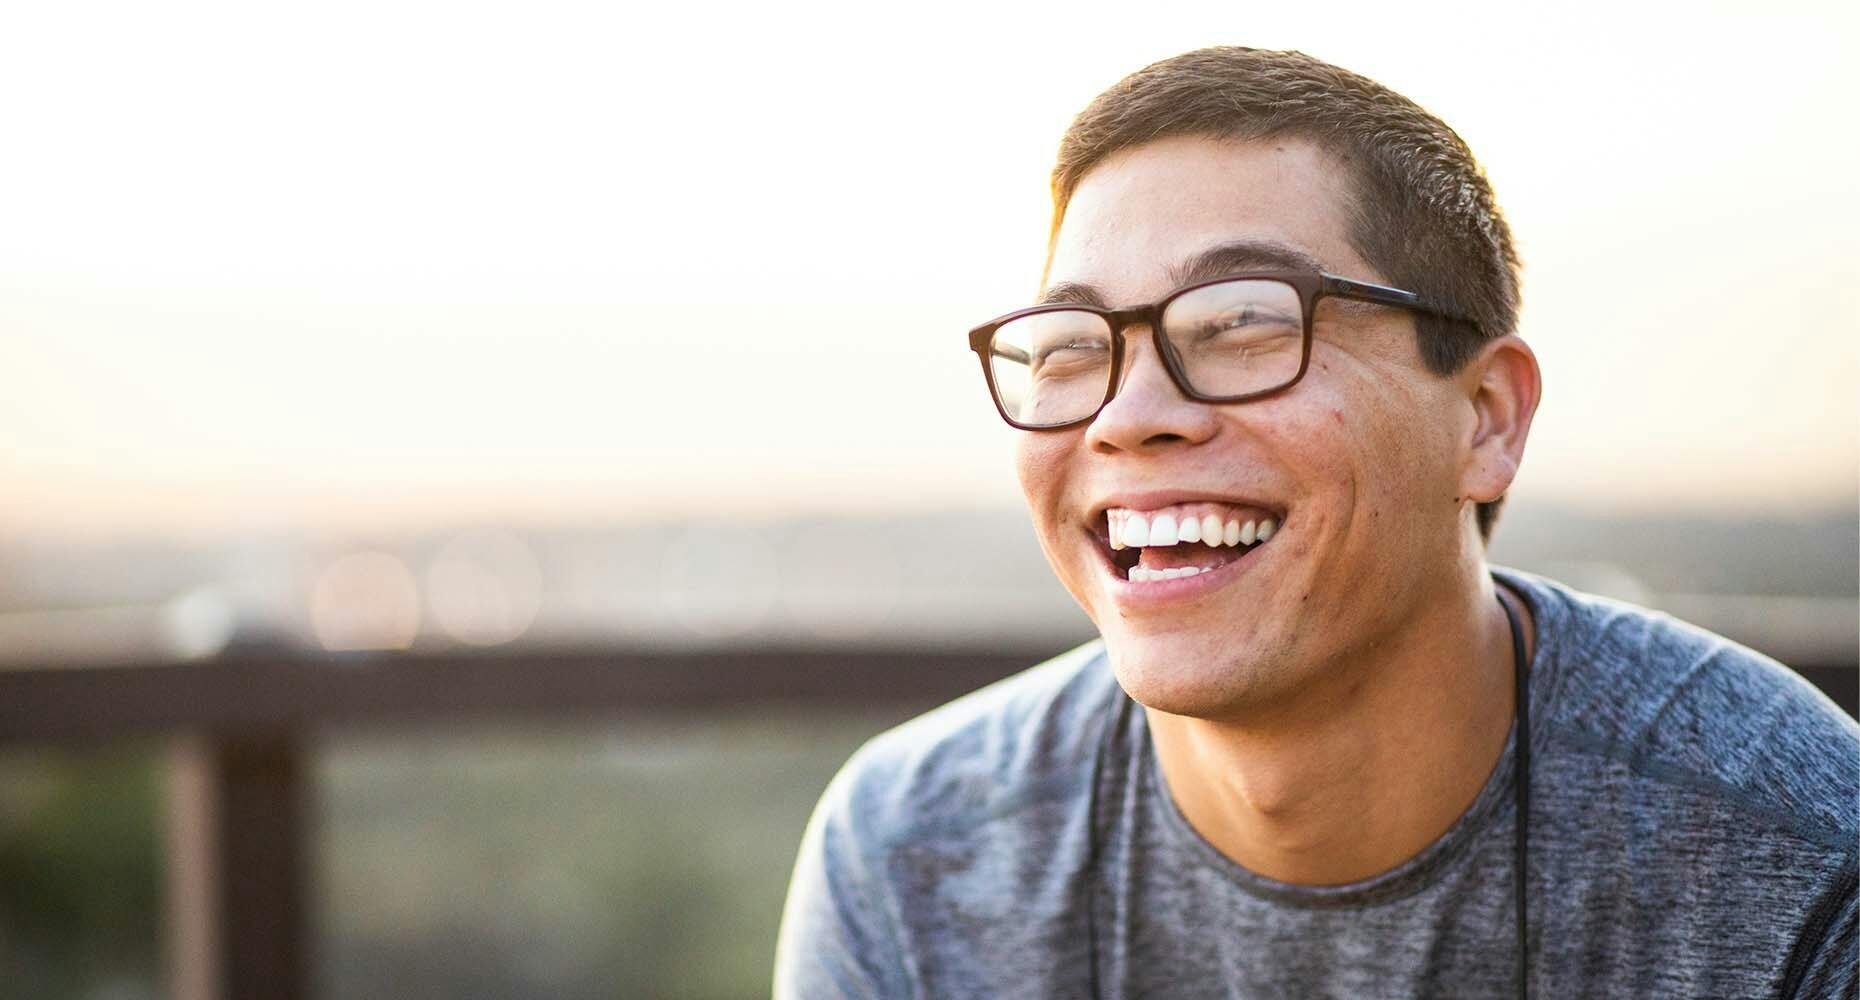 Man with glasses smiling outdoors